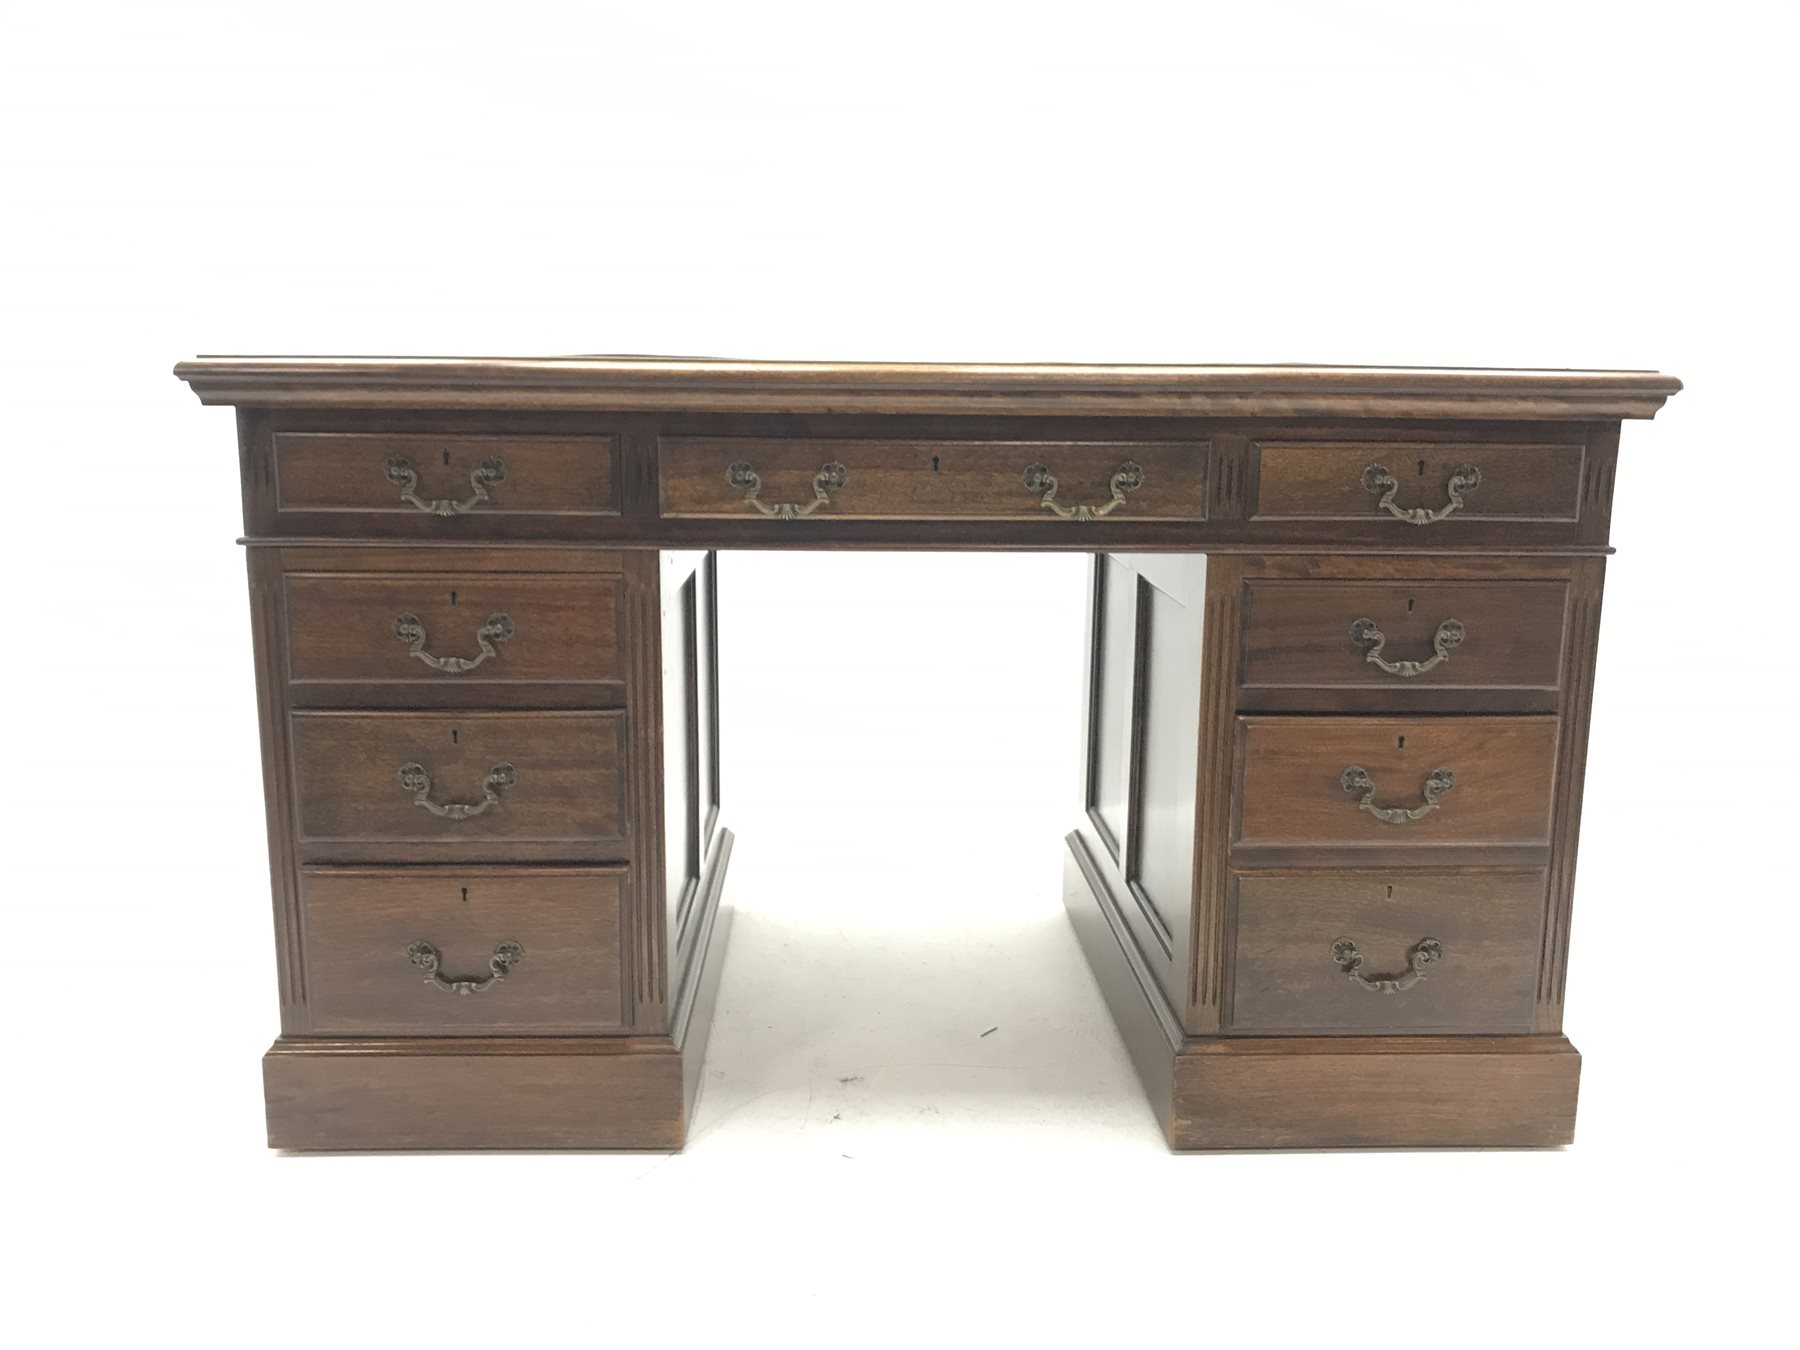 20th century mahogany twin pedestal office desk, fitted with nine drawers, inset leather writing su